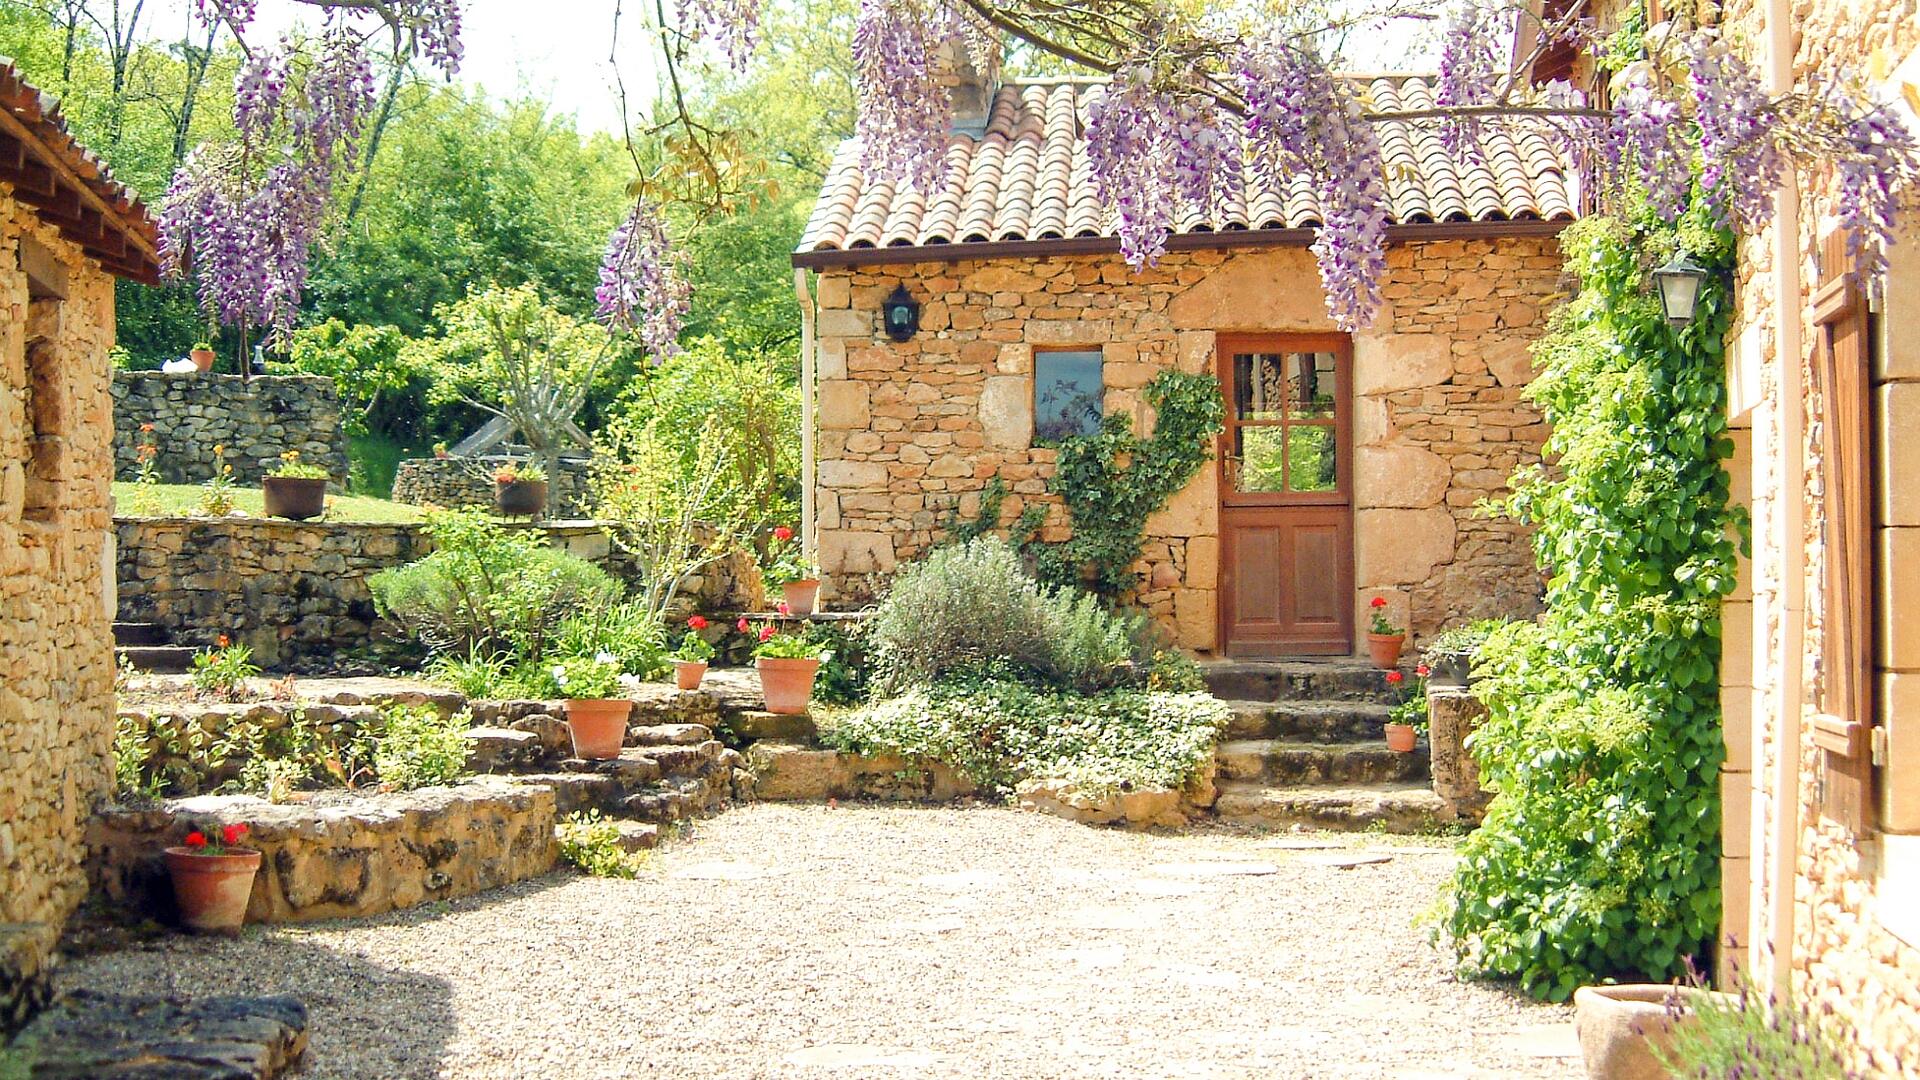 4 Bedroom Cottage/shared facilities in Aquitaine, France